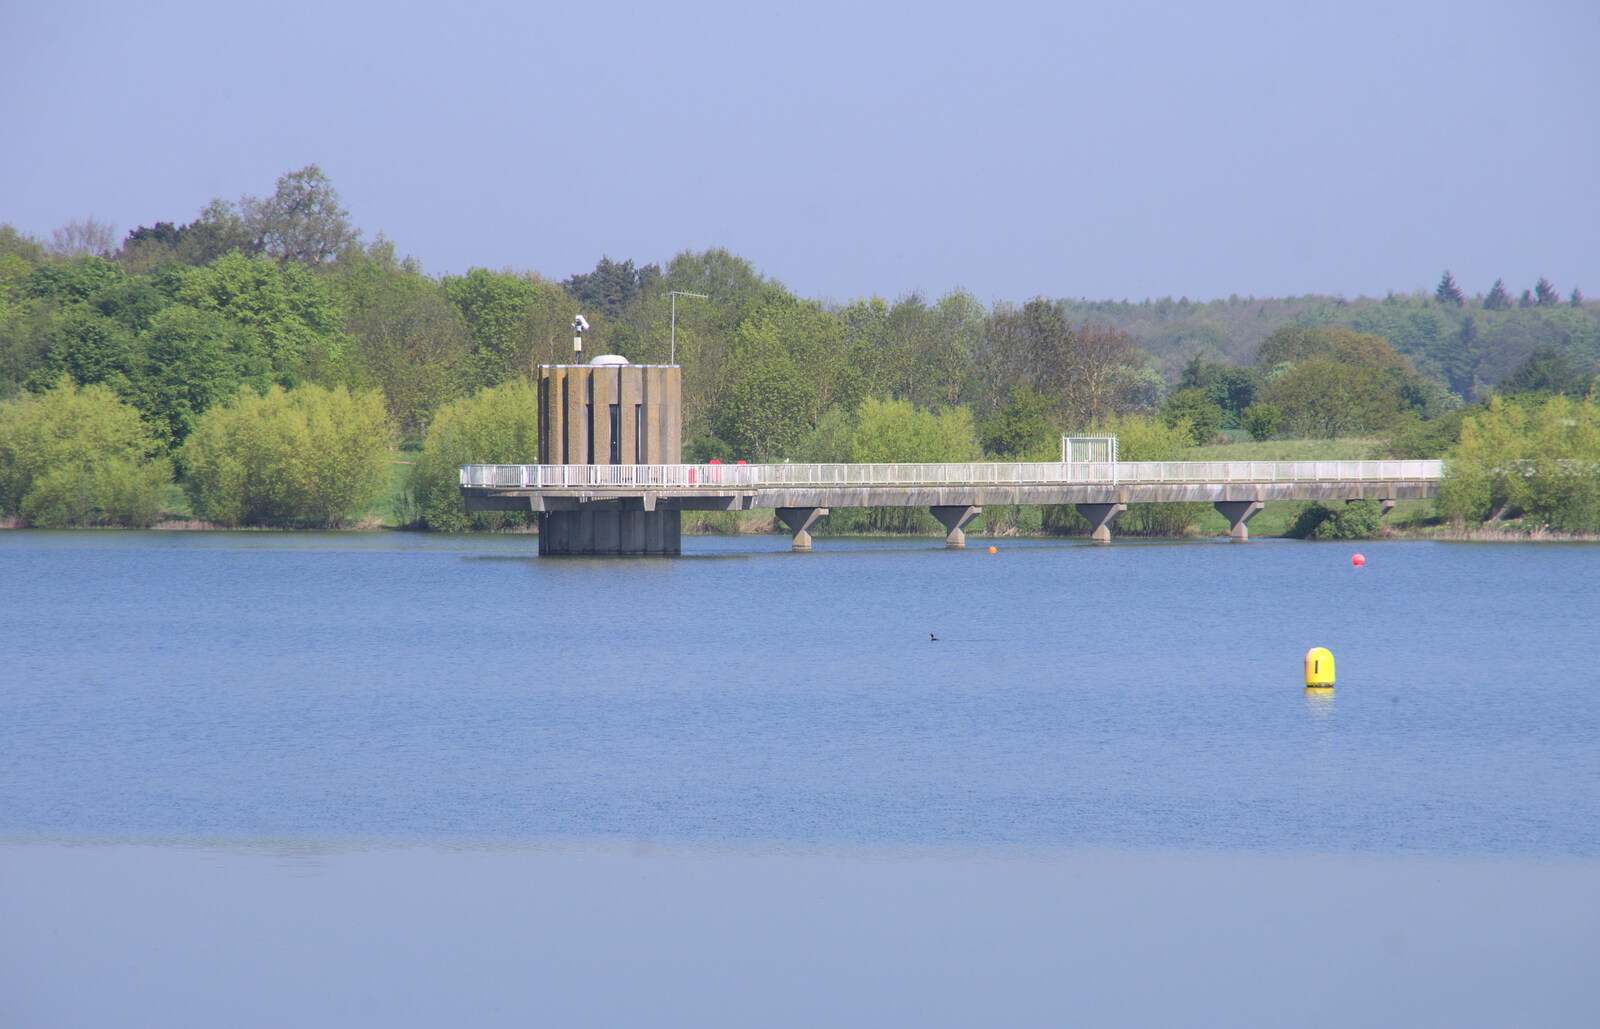 A Limnological tower over the resevoir from Isobel's 10km Run, Alton Water, Stutton, Suffolk - 6th May 2018